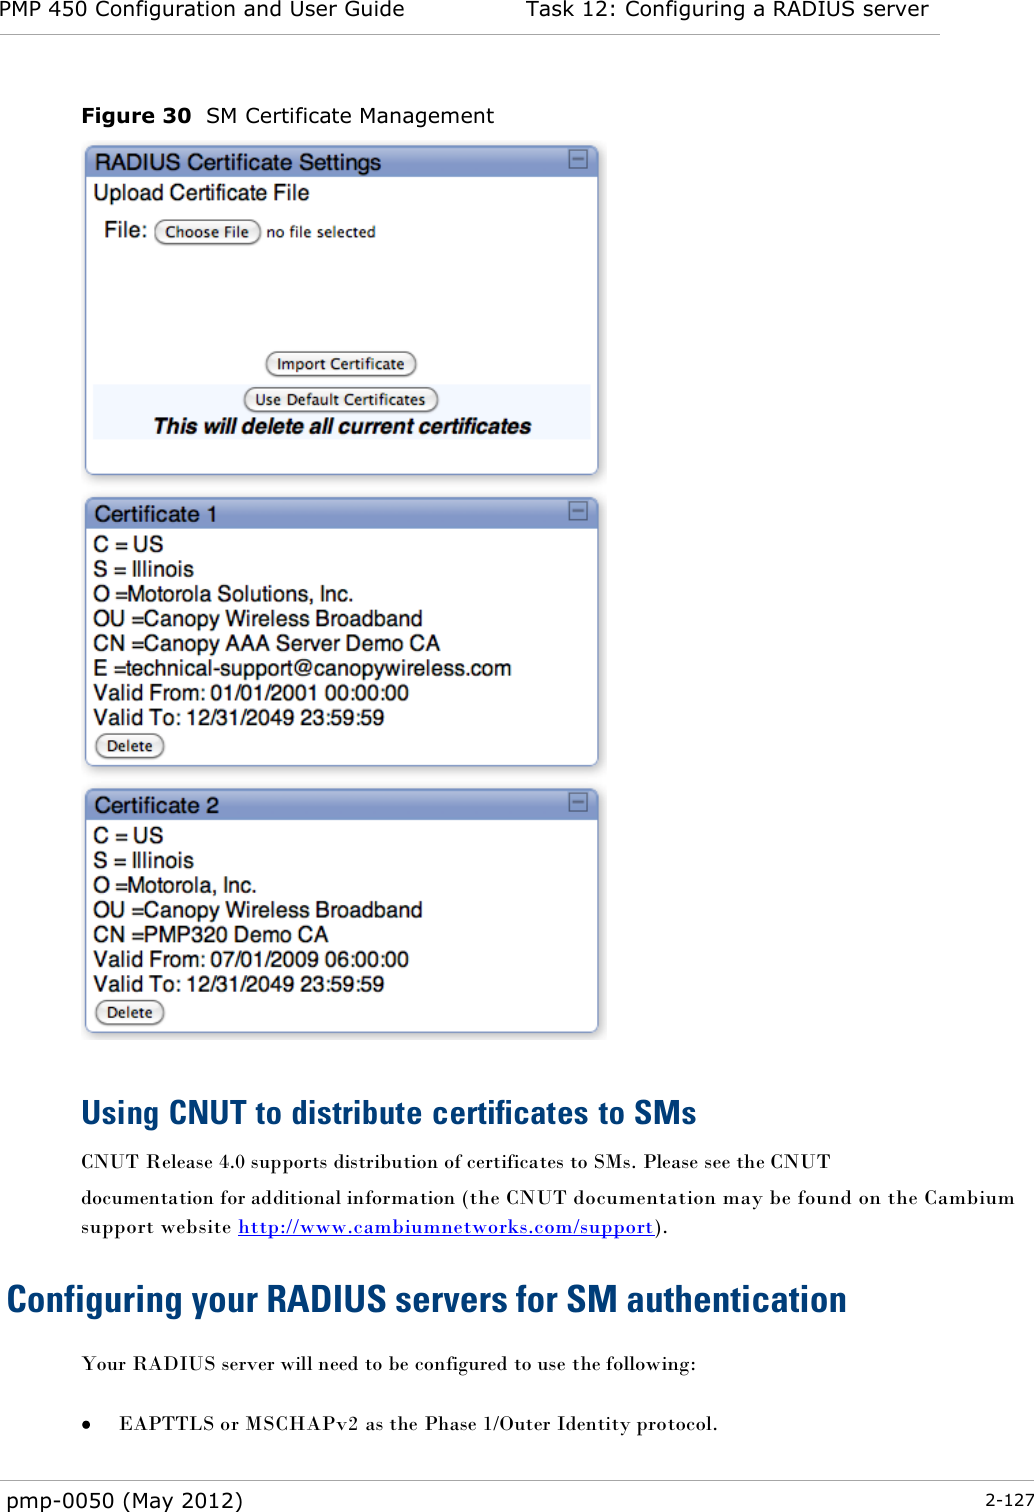 PMP 450 Configuration and User Guide Task 12: Configuring a RADIUS server  pmp-0050 (May 2012)  2-127  Figure 30  SM Certificate Management   Using CNUT to distribute certificates to SMs CNUT Release 4.0 supports distribution of certificates to SMs. Please see the CNUT documentation for additional information (the CNUT documentation may be found on the Cambium support website http://www.cambiumnetworks.com/support). Configuring your RADIUS servers for SM authentication Your RADIUS server will need to be configured to use the following:   EAPTTLS or MSCHAPv2 as the Phase 1/Outer Identity protocol. 